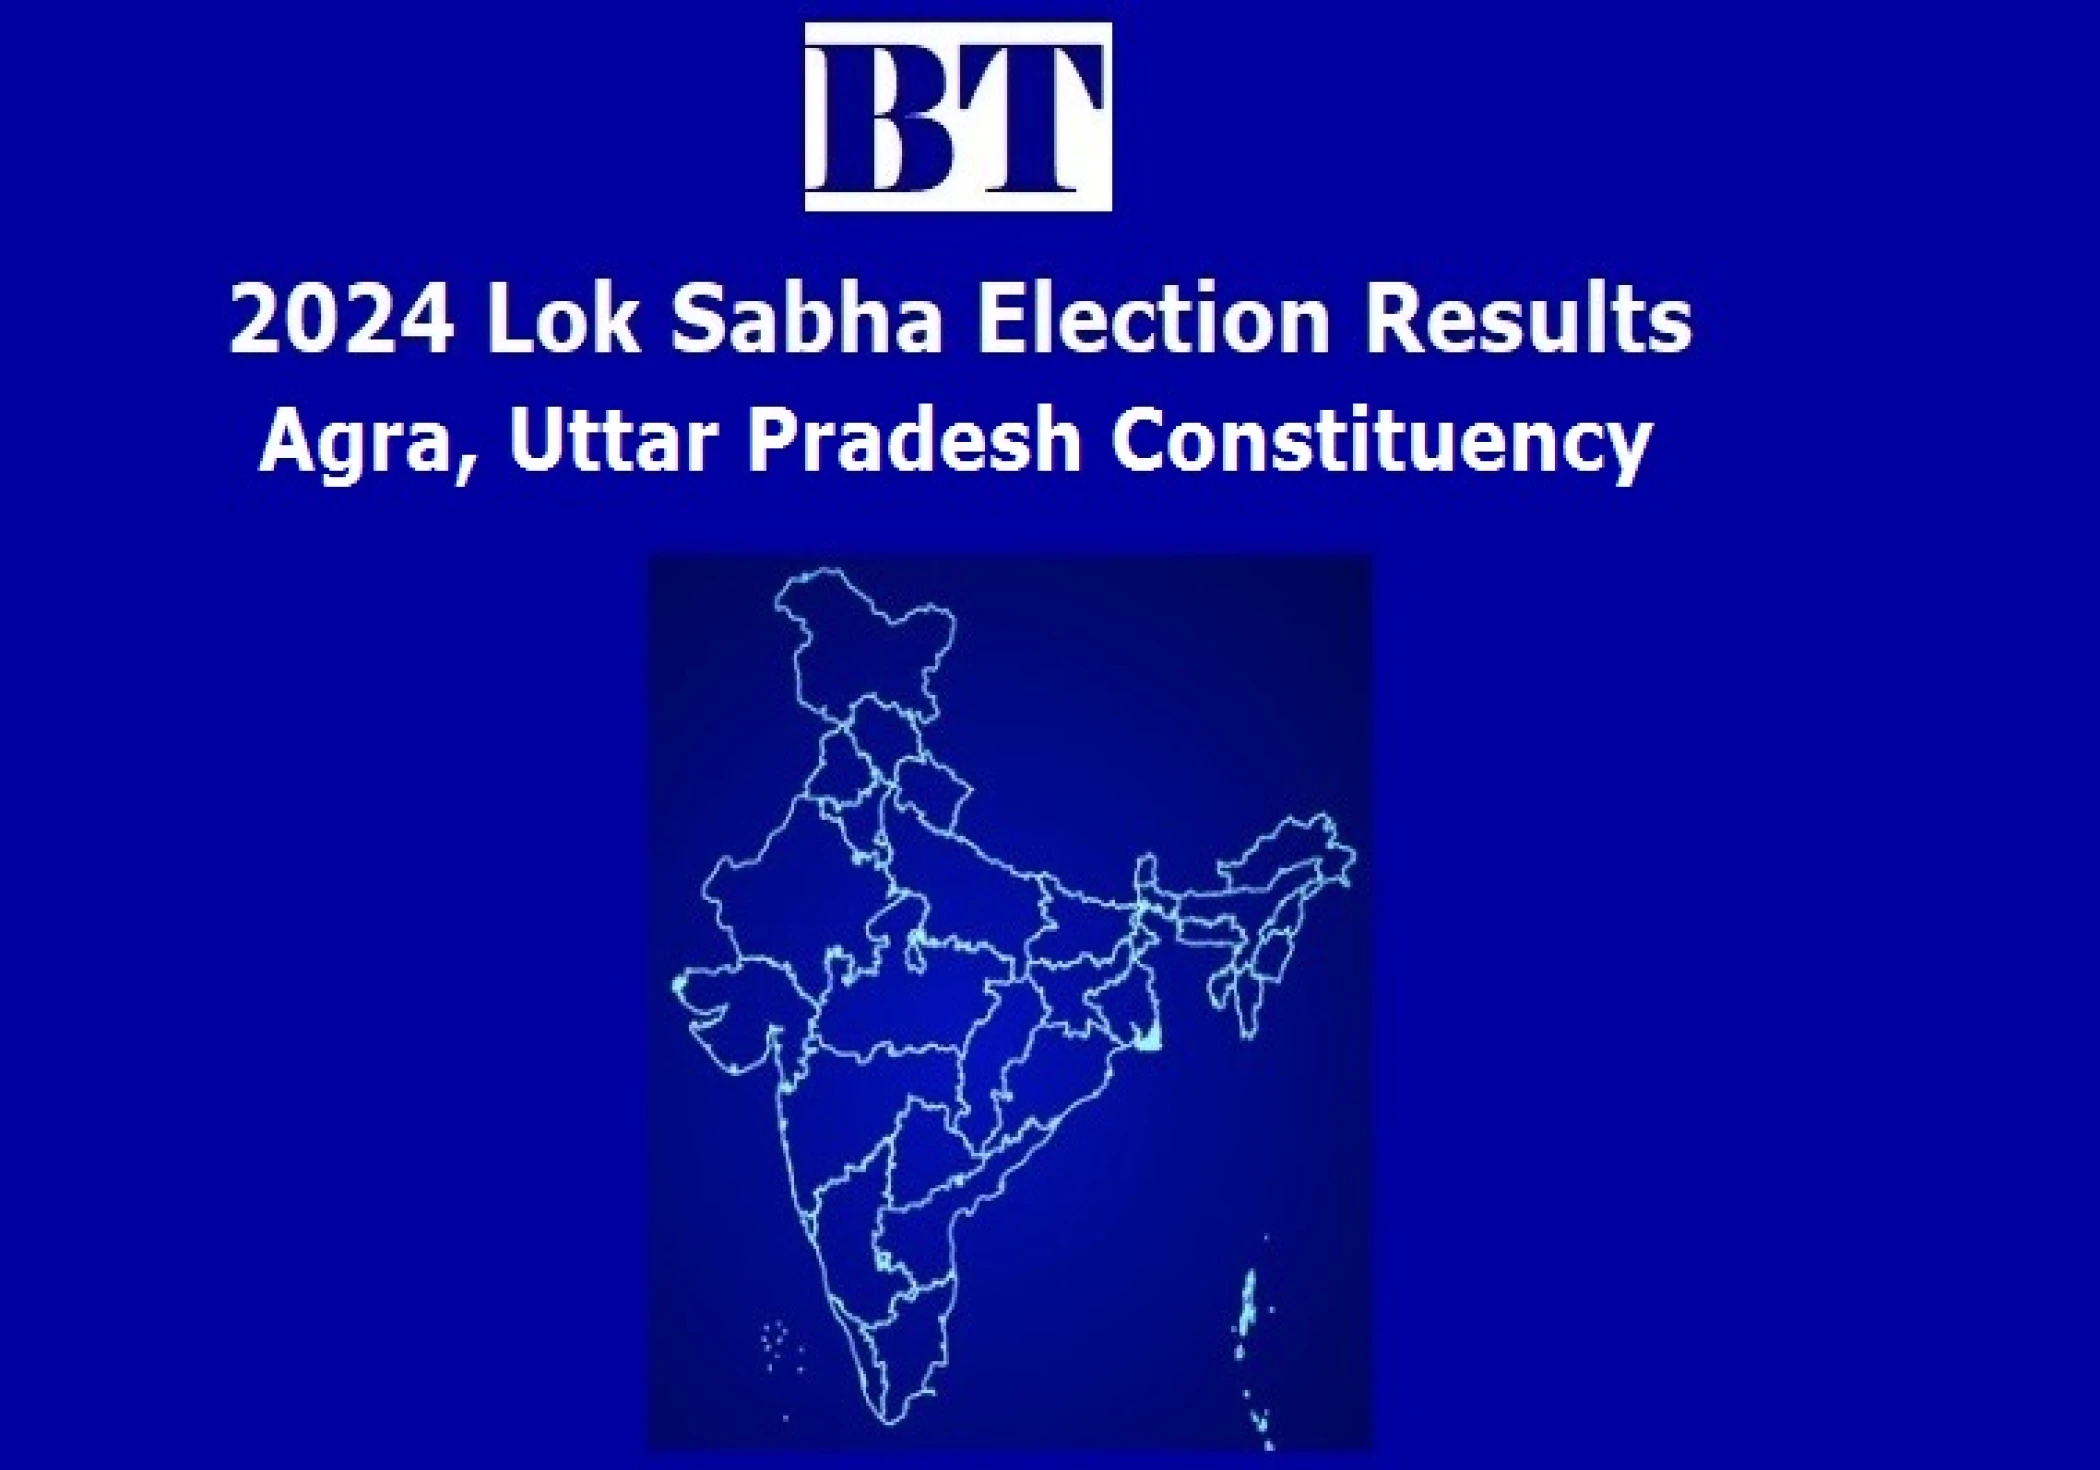 Agra Constituency Lok Sabha Election Results 2024